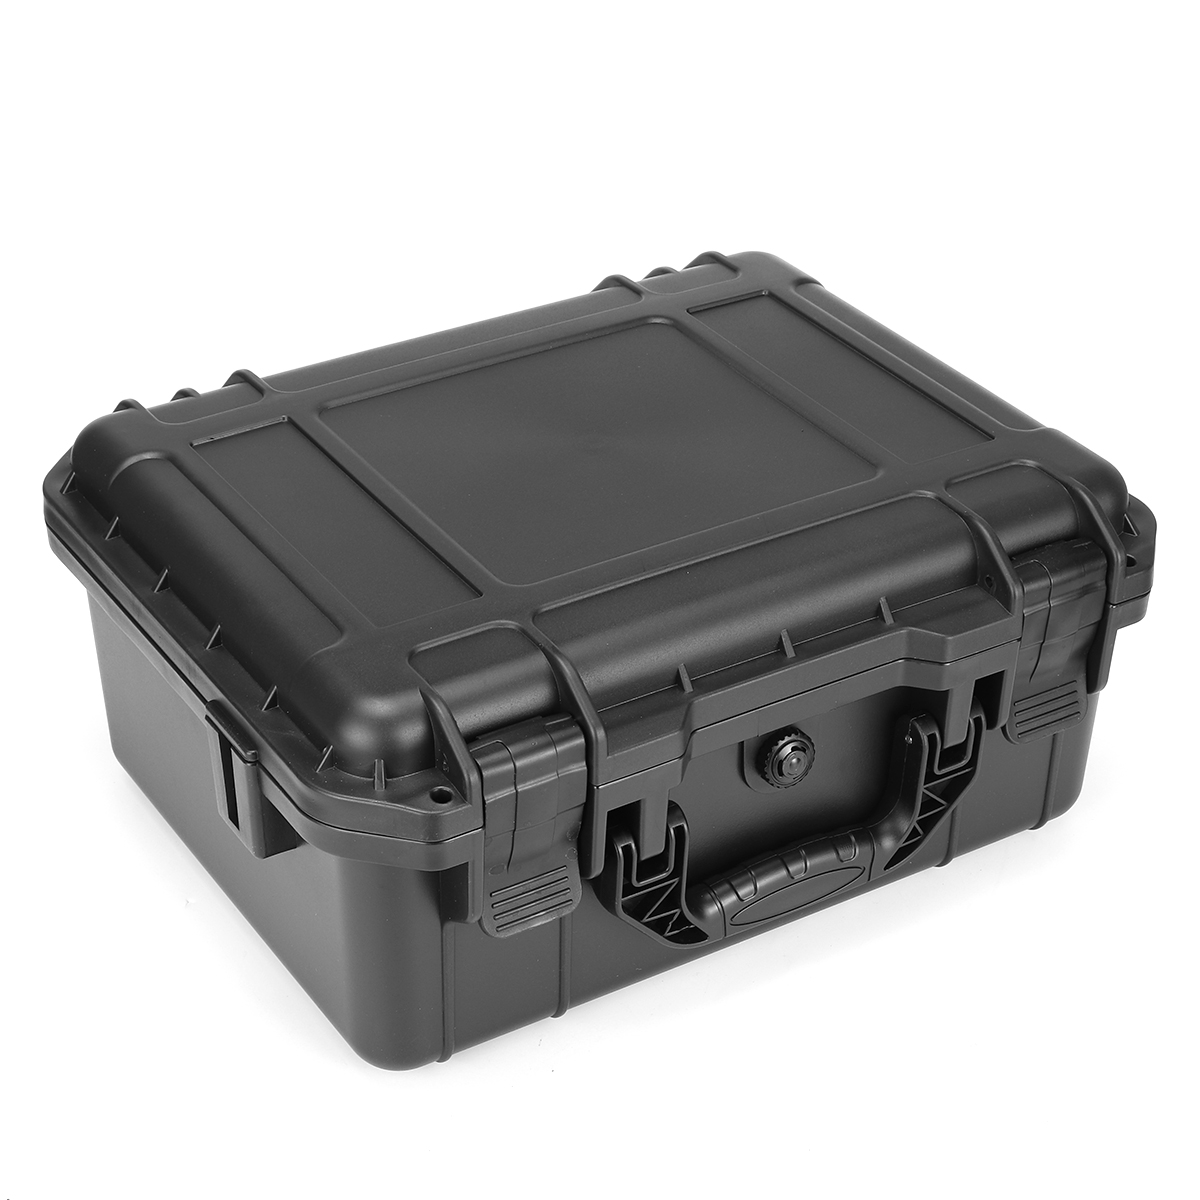 1PC-Shockproof-Sealed-Safety-Case-Toolbox-Airtight-Waterproof-Tool-Box-Instrument-Case-Dry-Box-with--1915433-8